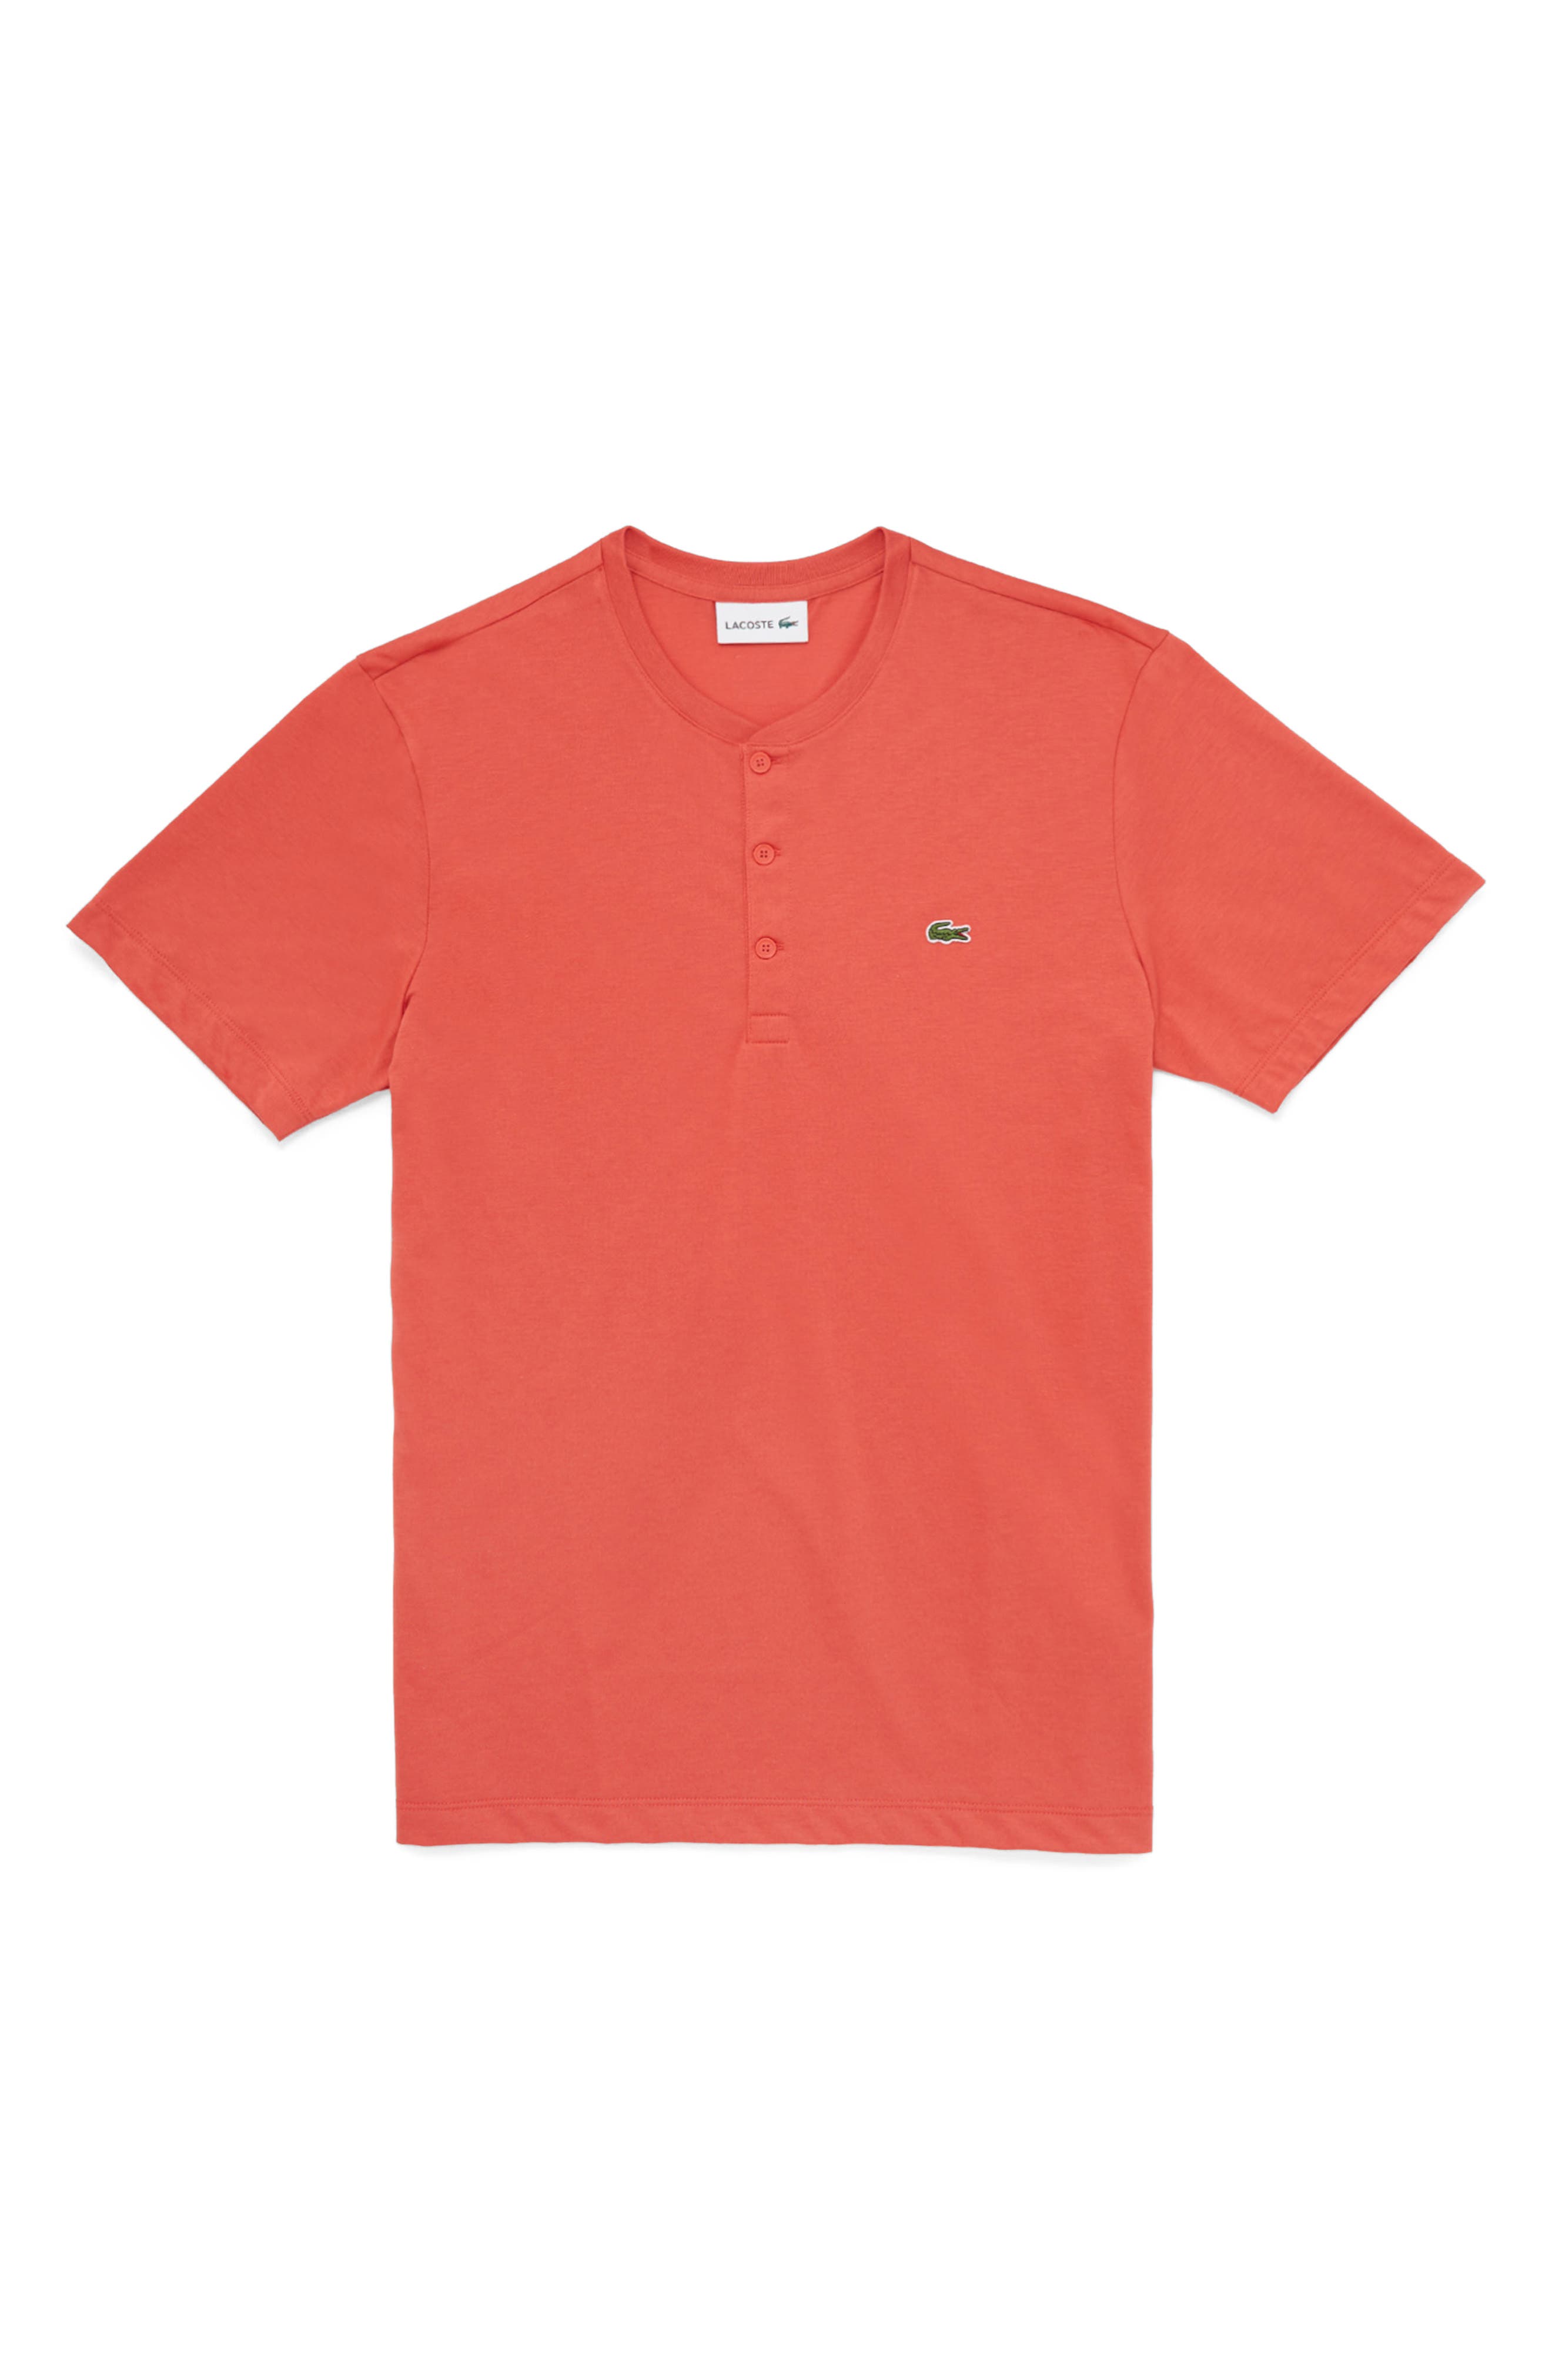 lacoste big and tall clearance